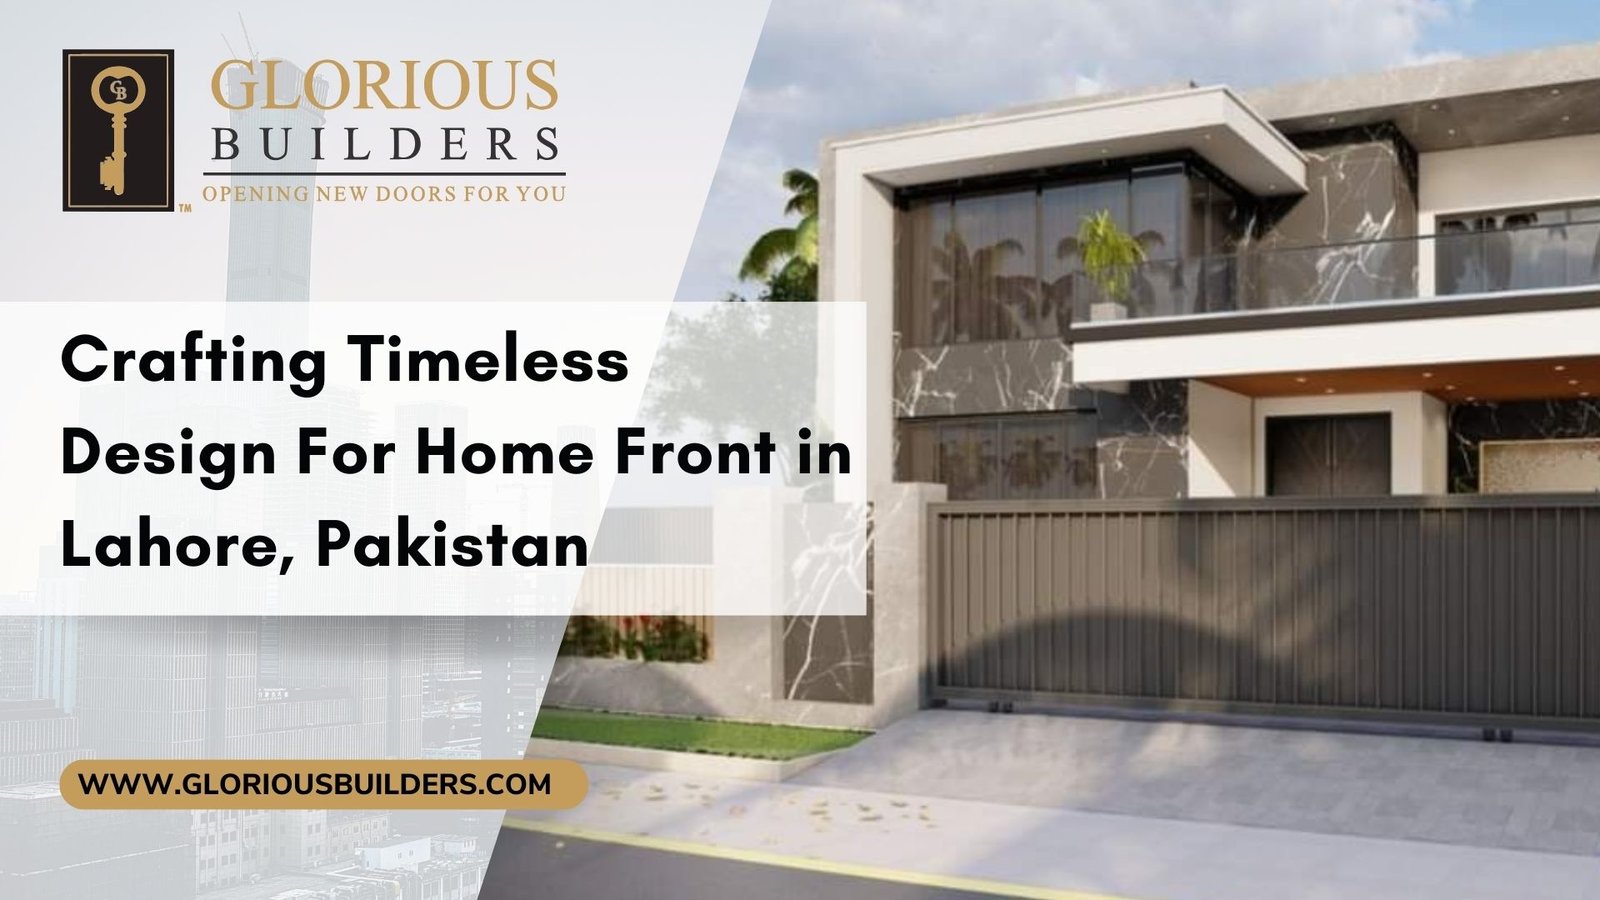 Crafting Timeless Design For Home Front in Lahore, Pakistan